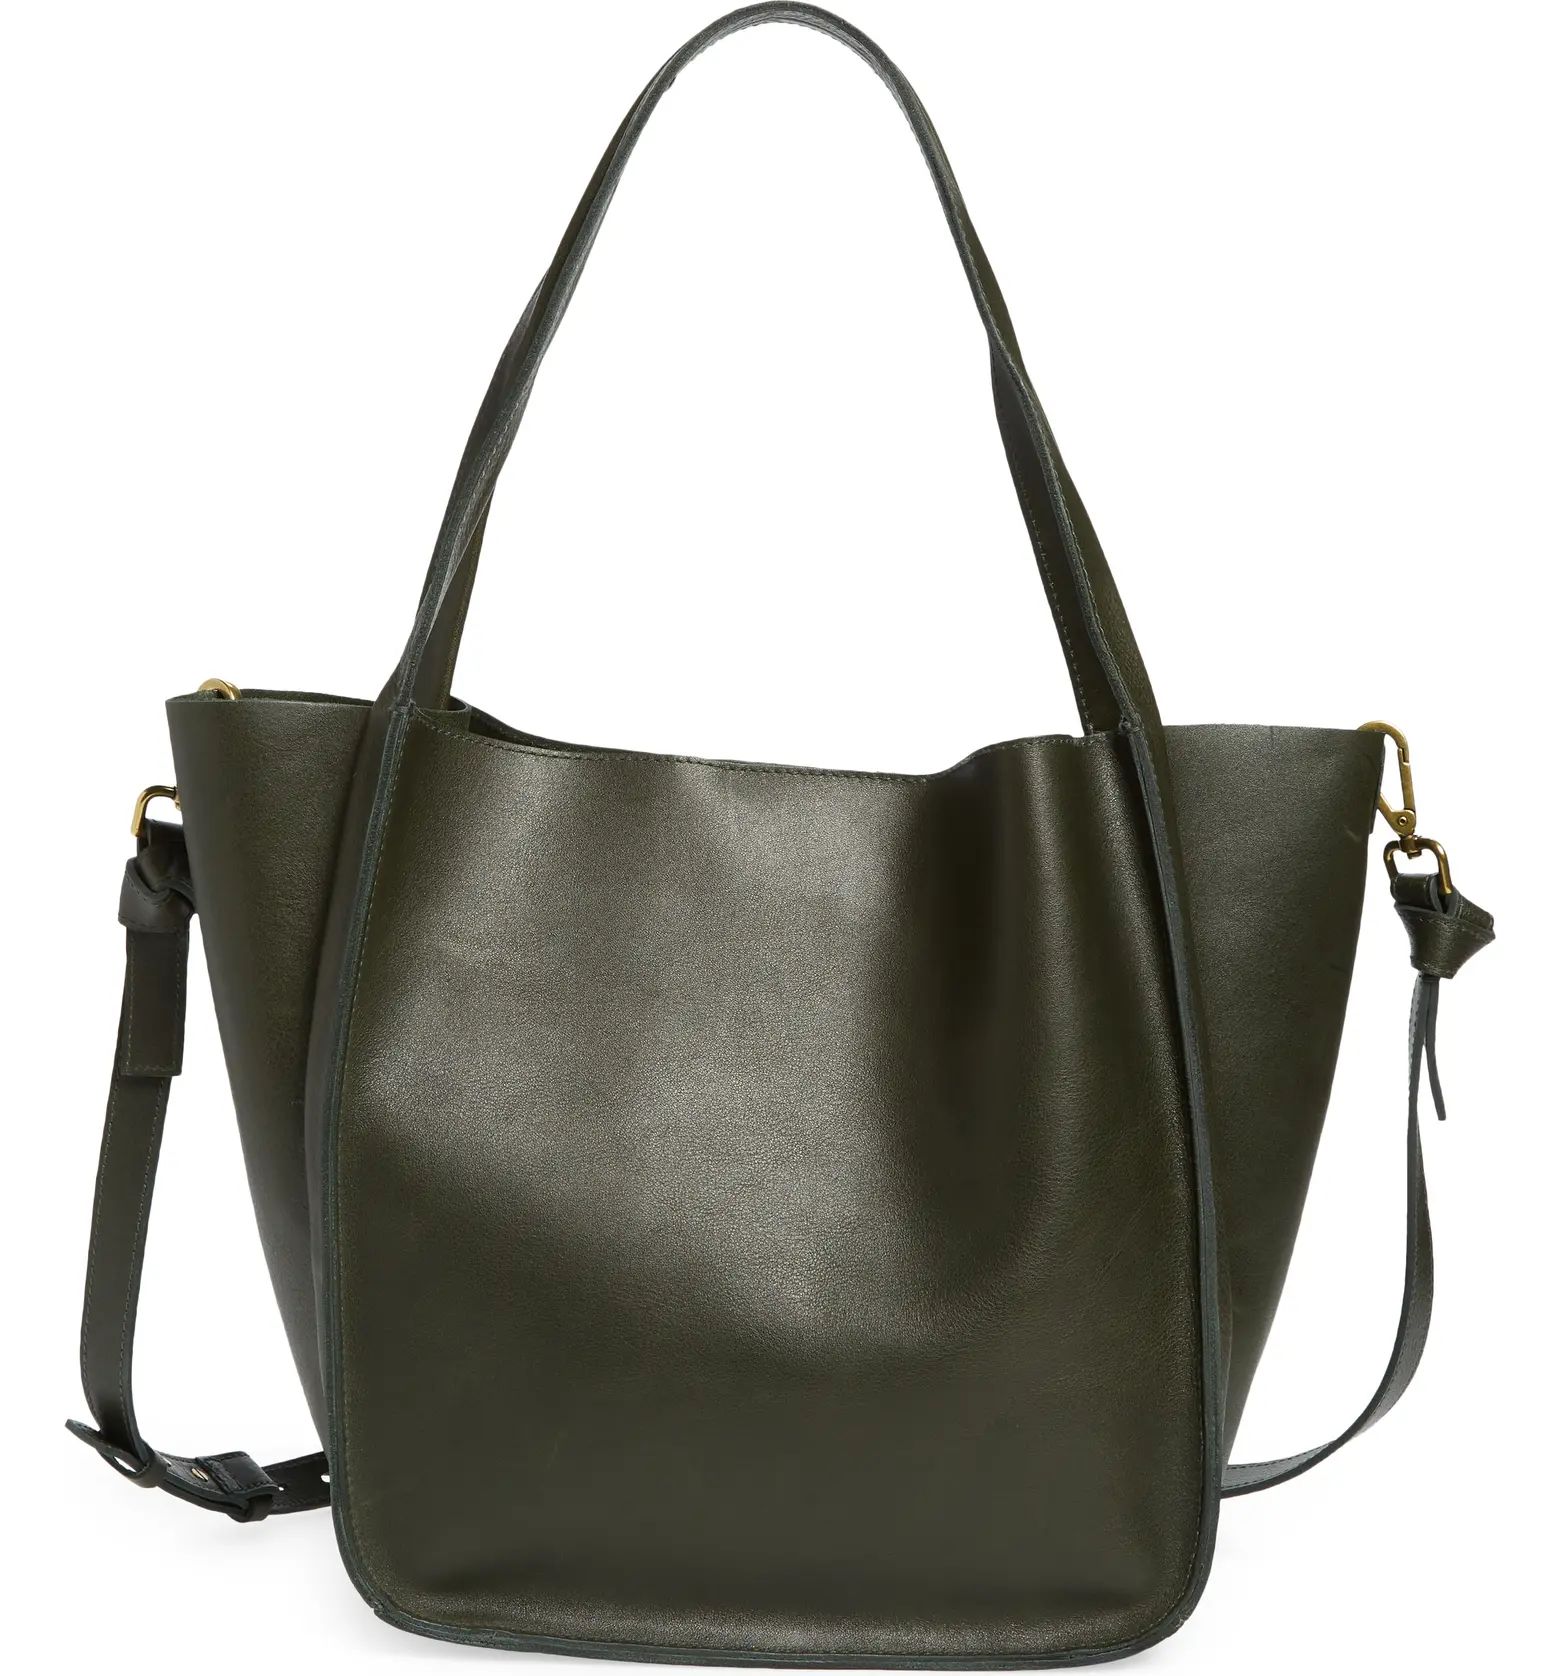 The Sydney Leather Tote | Nordstrom